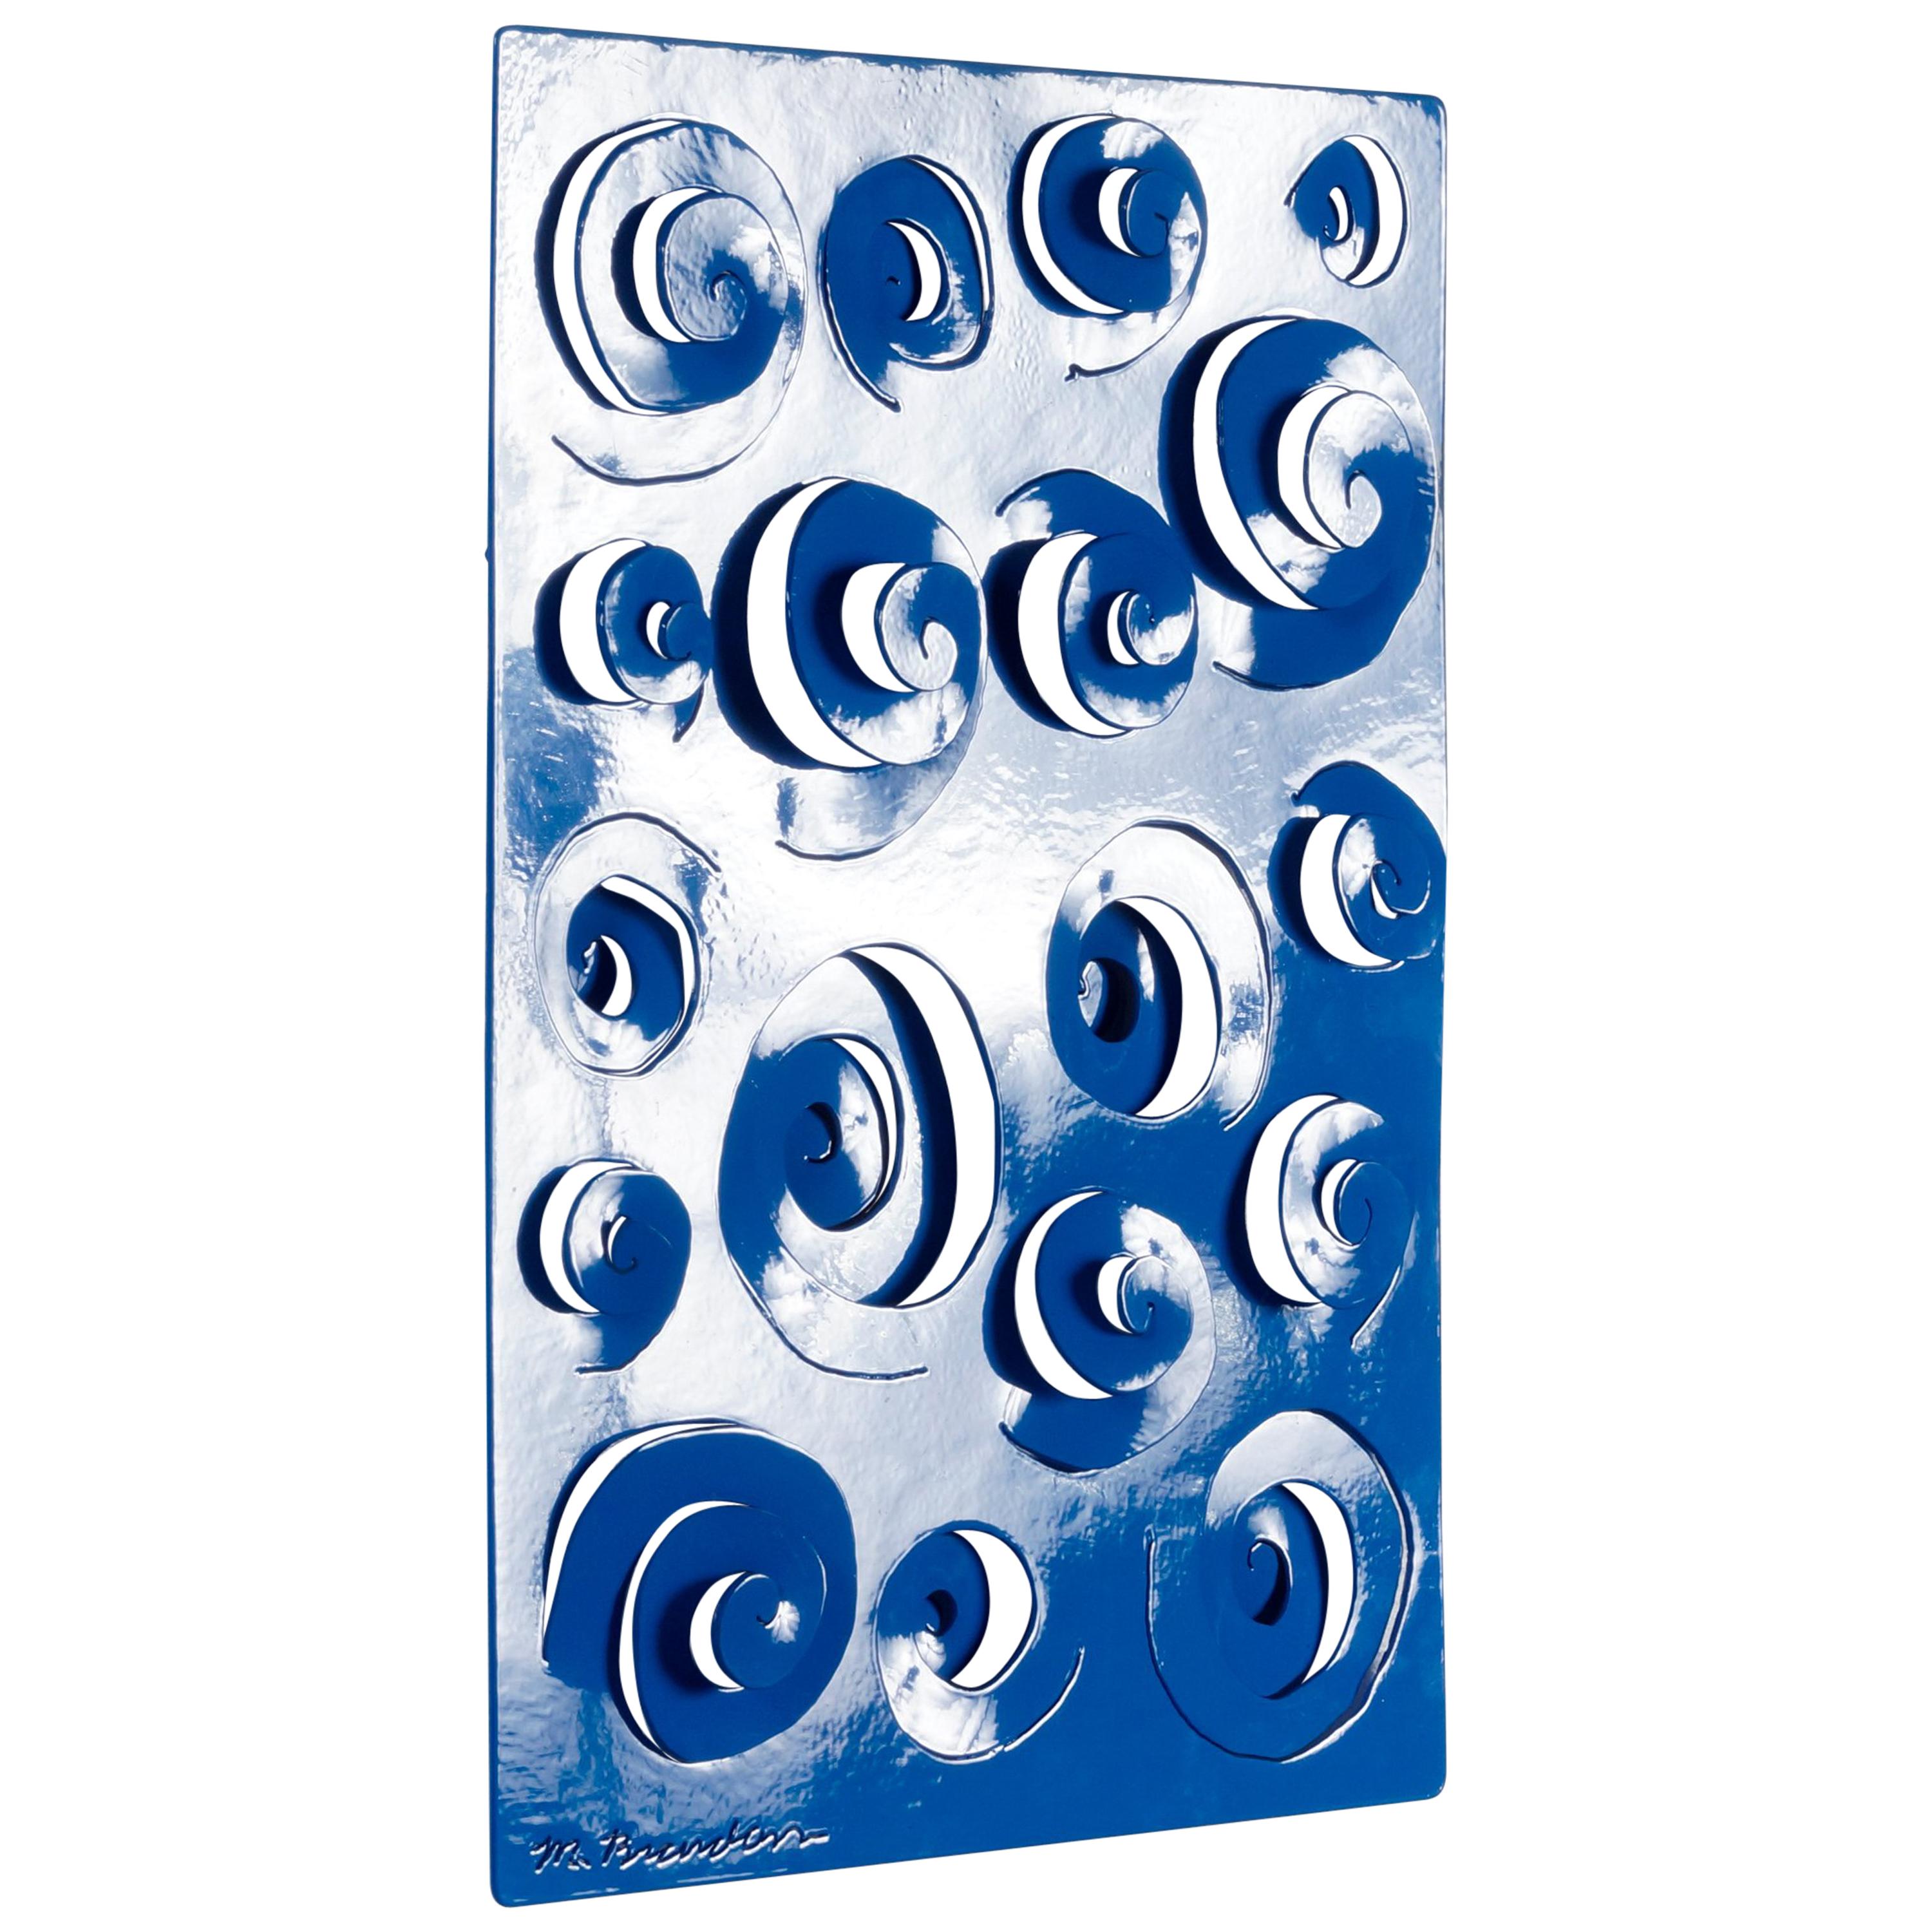 Sculptural Steel Wall Hanging with Optical Design, Signed M. Brandon For Sale